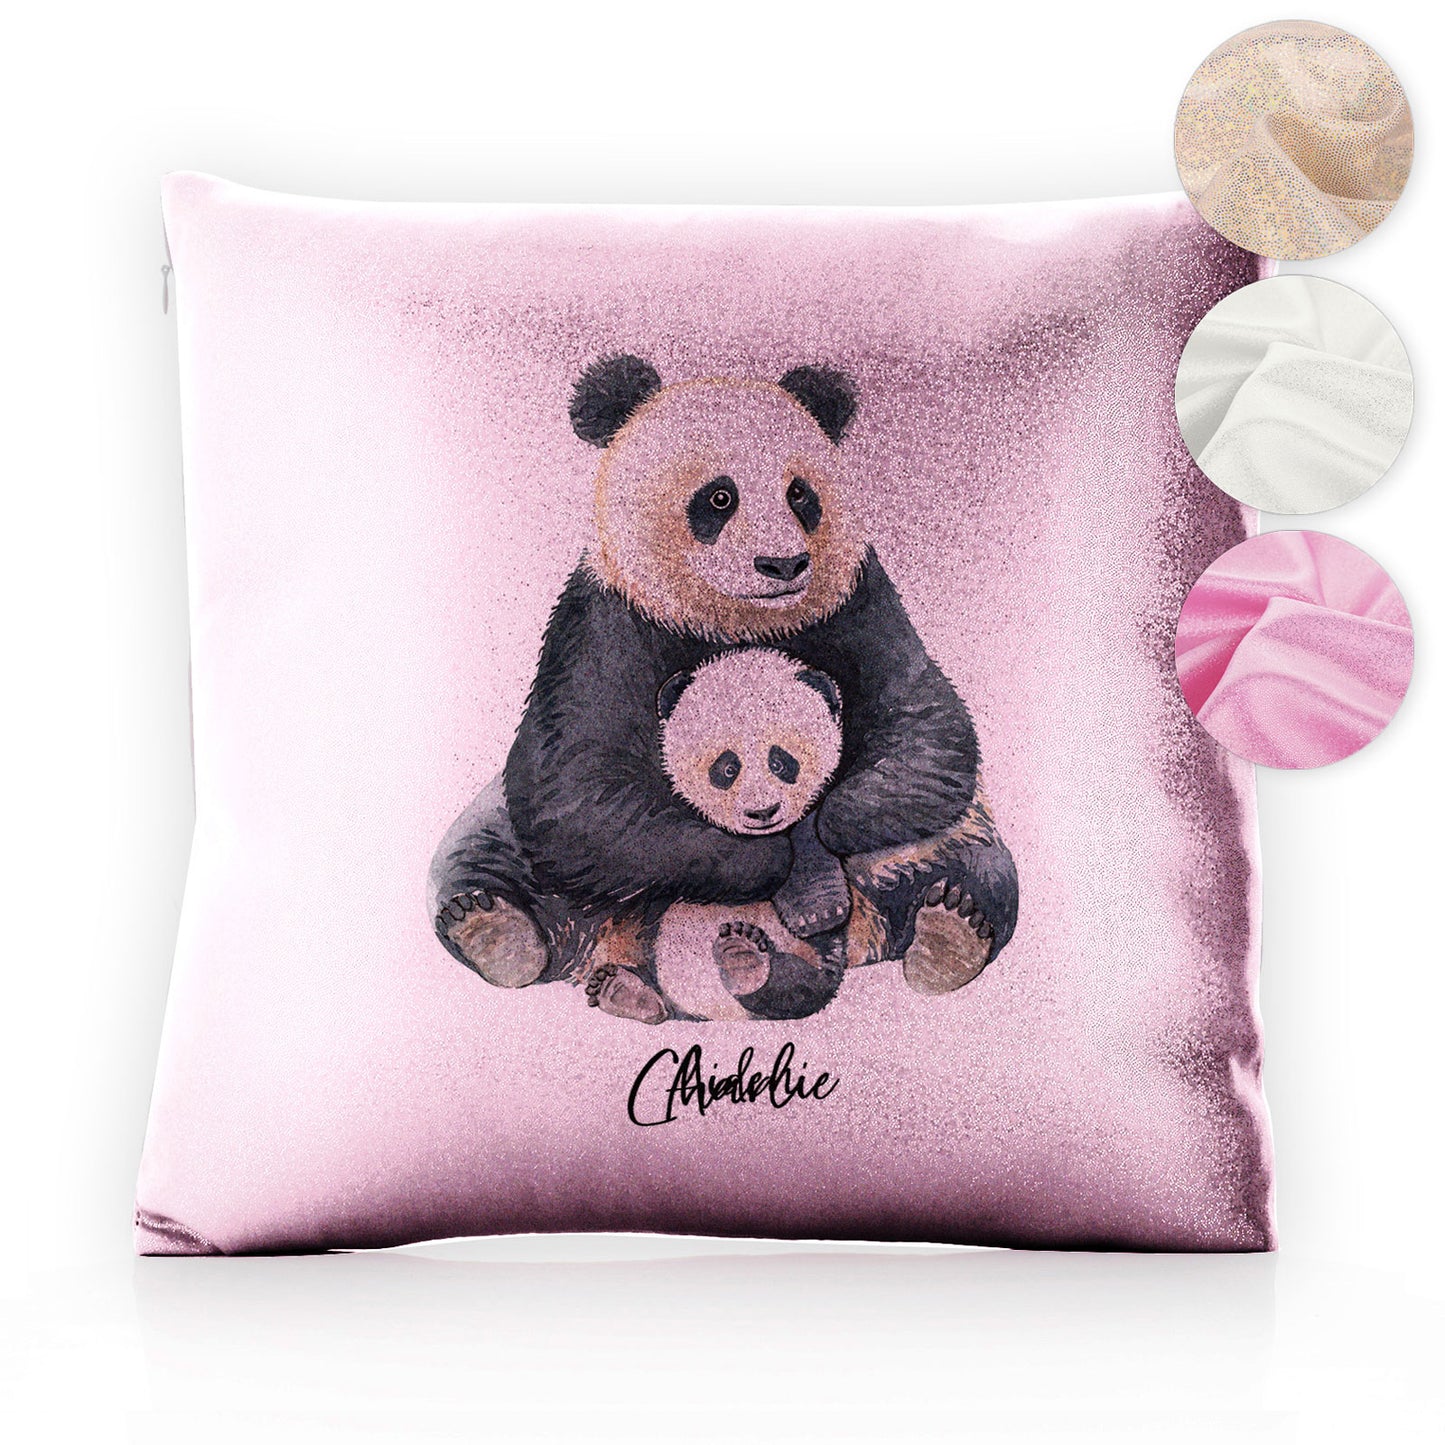 Personalised Glitter Cushion with Welcoming Text and Relaxing Mum and Baby Pandas